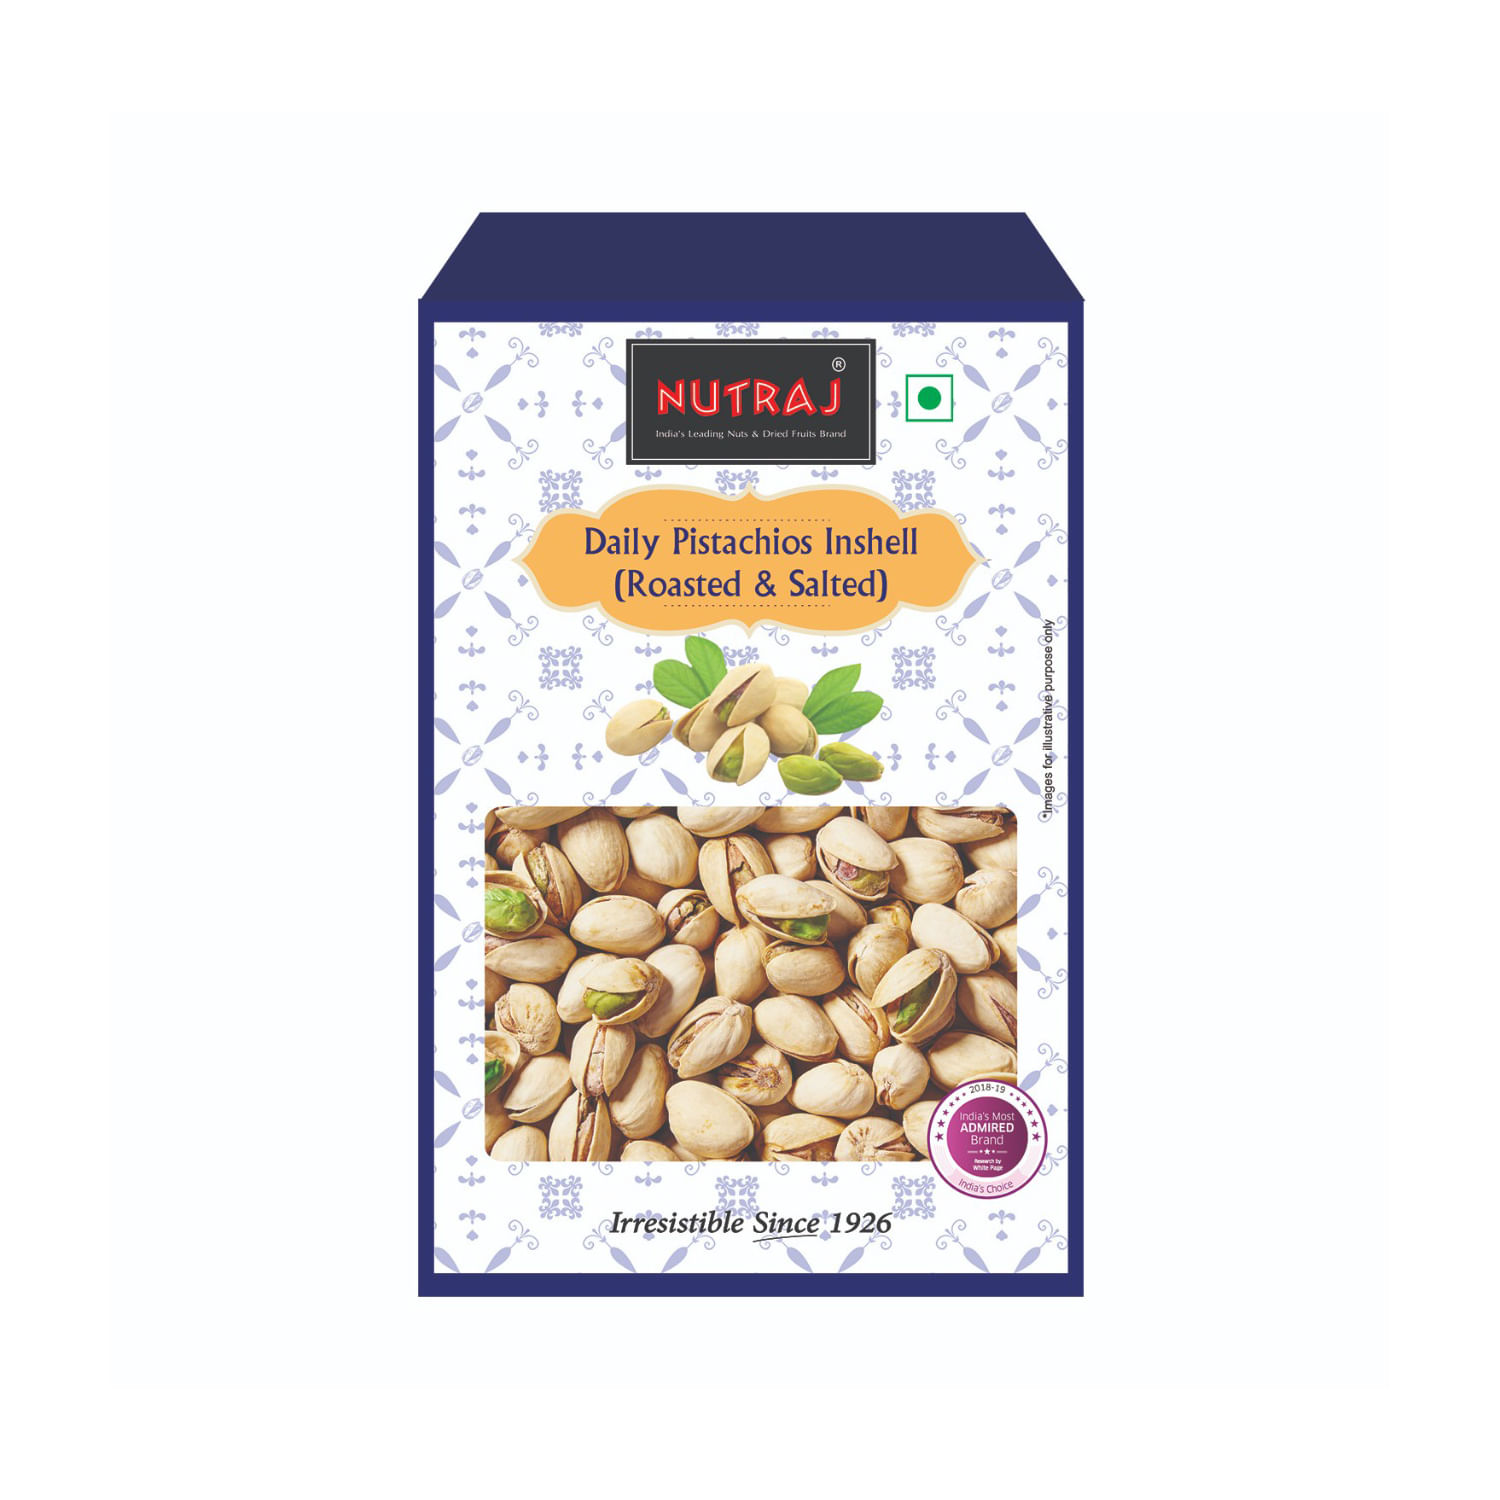 Nutraj Daily Pistachios In shell Roasted and Salted 500g